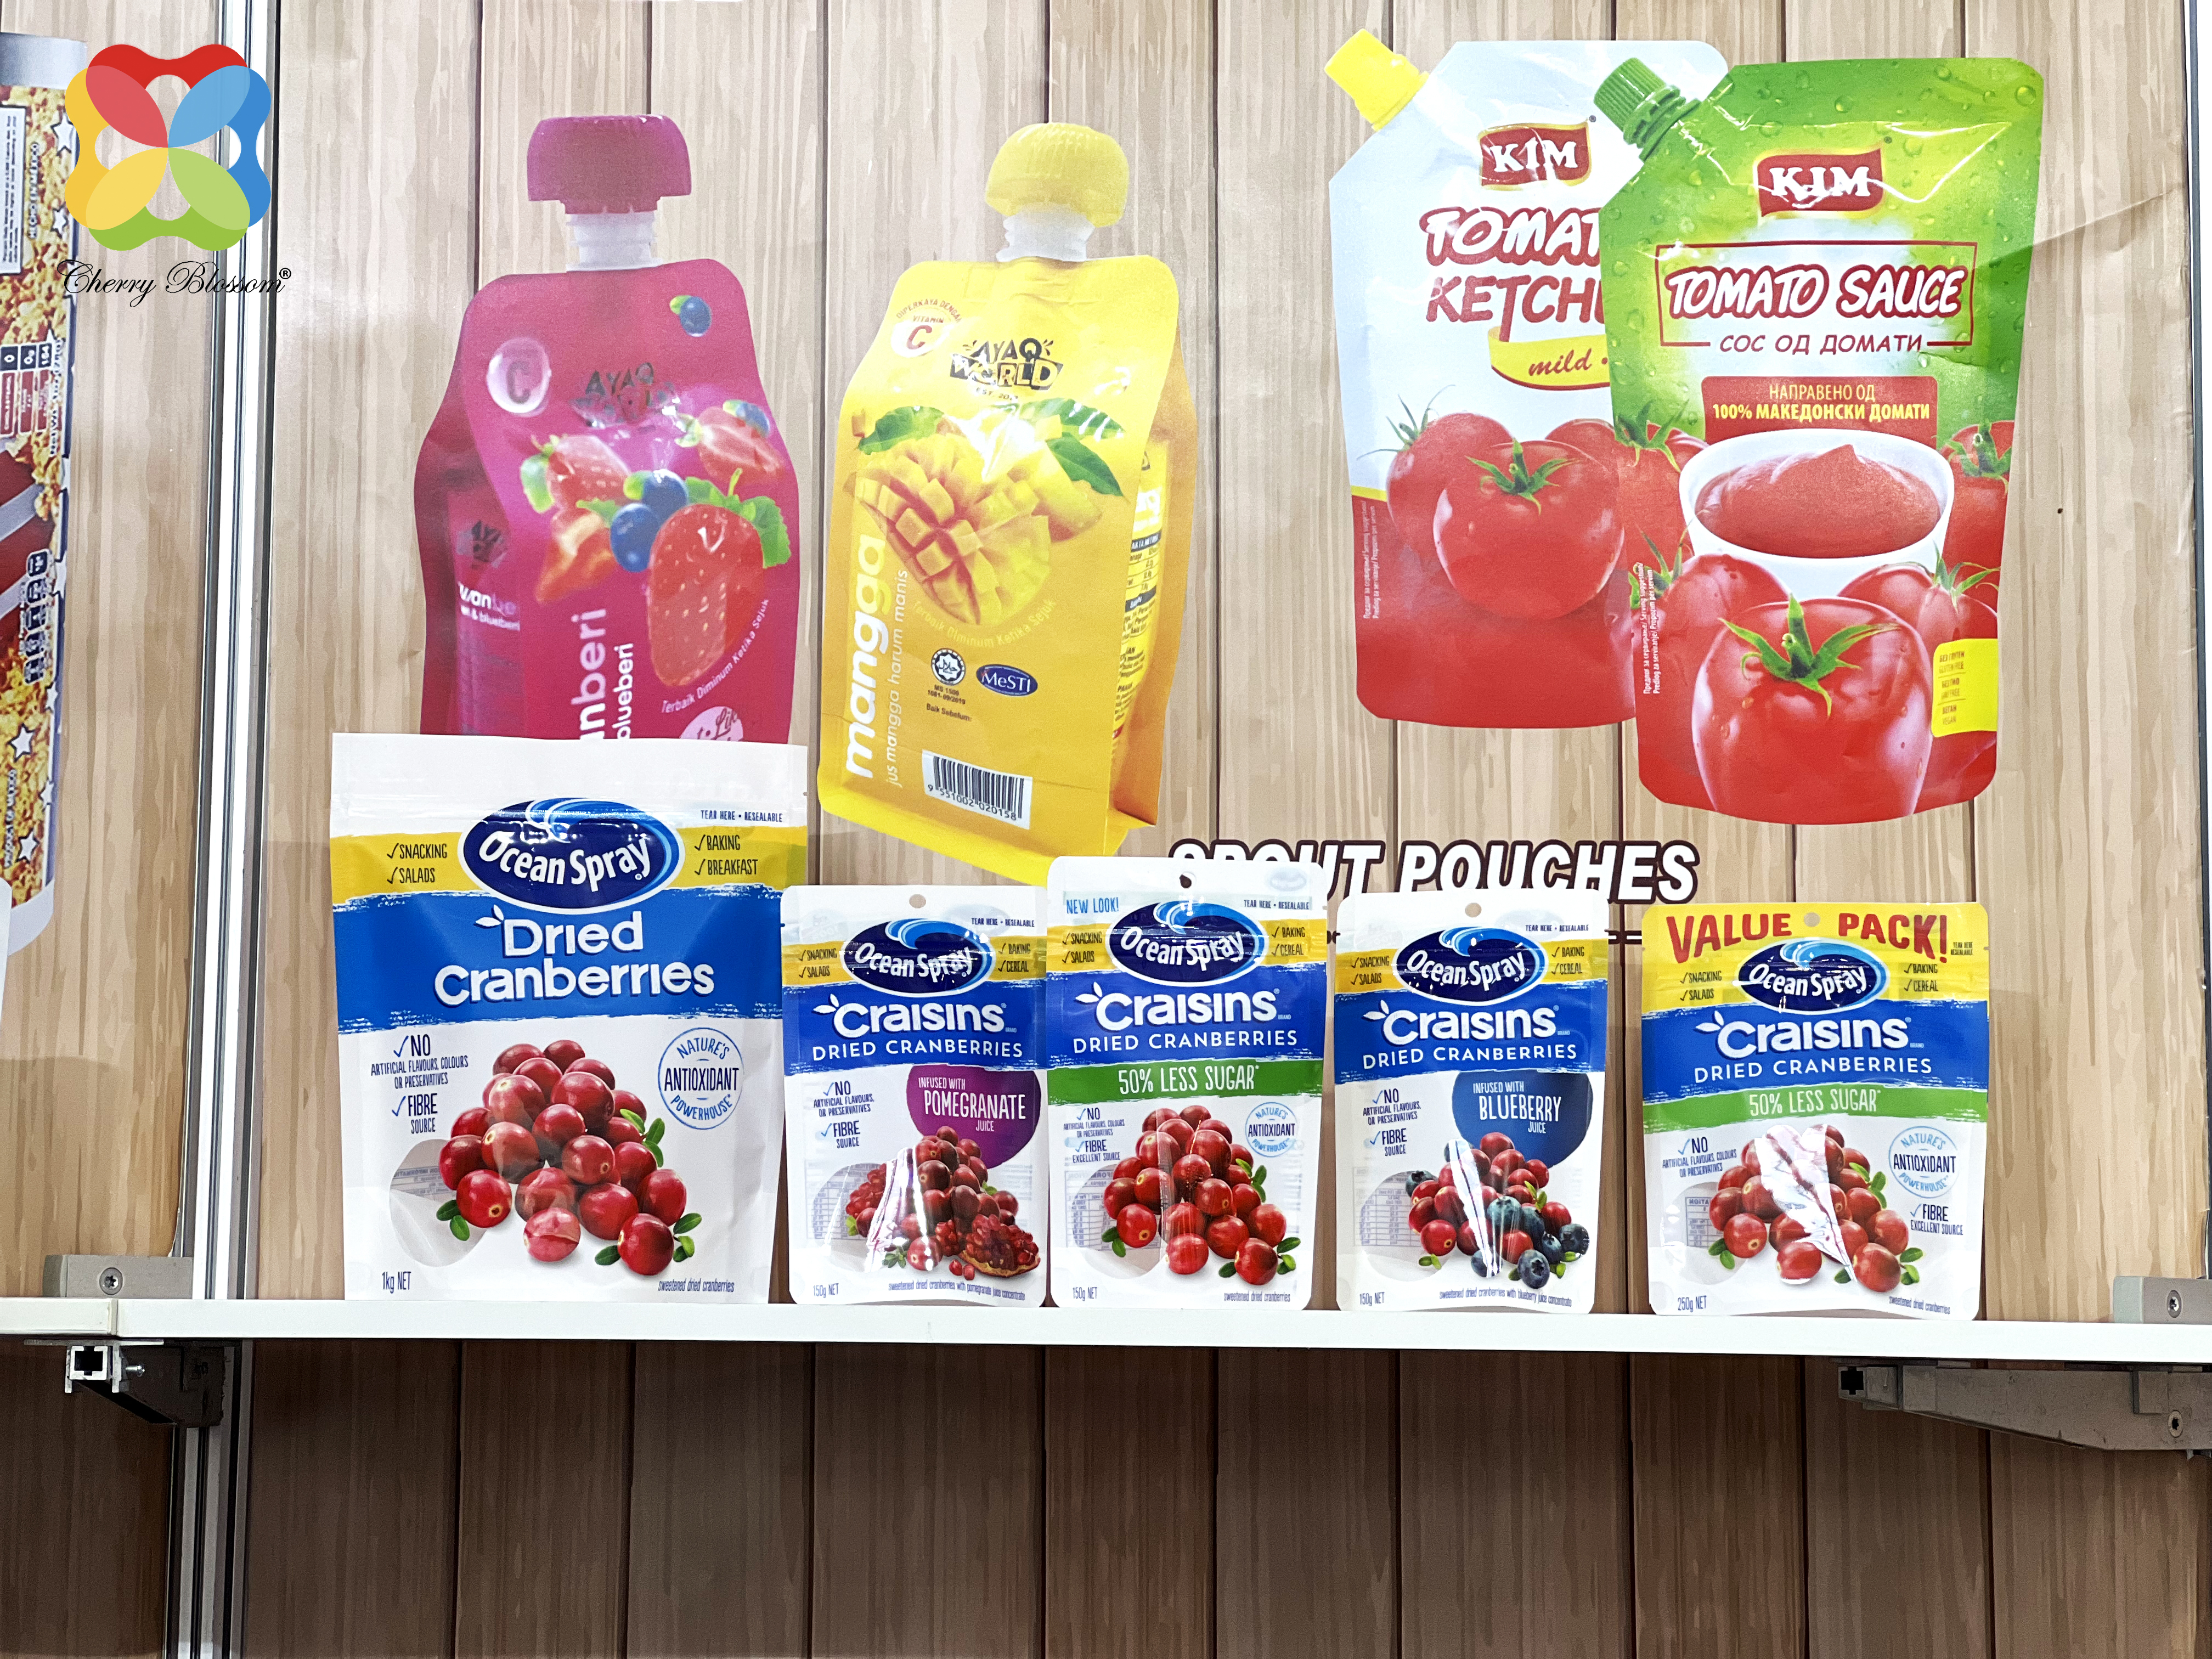 Flexibel Pouch Verpackung Plastik Pouch Verpackung Këssen Pouch Verpackung Retort Pouch Verpackung Liquid Pouch Verpackung Standing Pouch Verpackung Pabeier Pouch Verpackung Pouch Bag Verpackung Folie Pouch Verpackung Spout Pouch Verpackung Liewensmëttel Verpackung Pouch Téi Verpackung Pouch pre-made Pouch